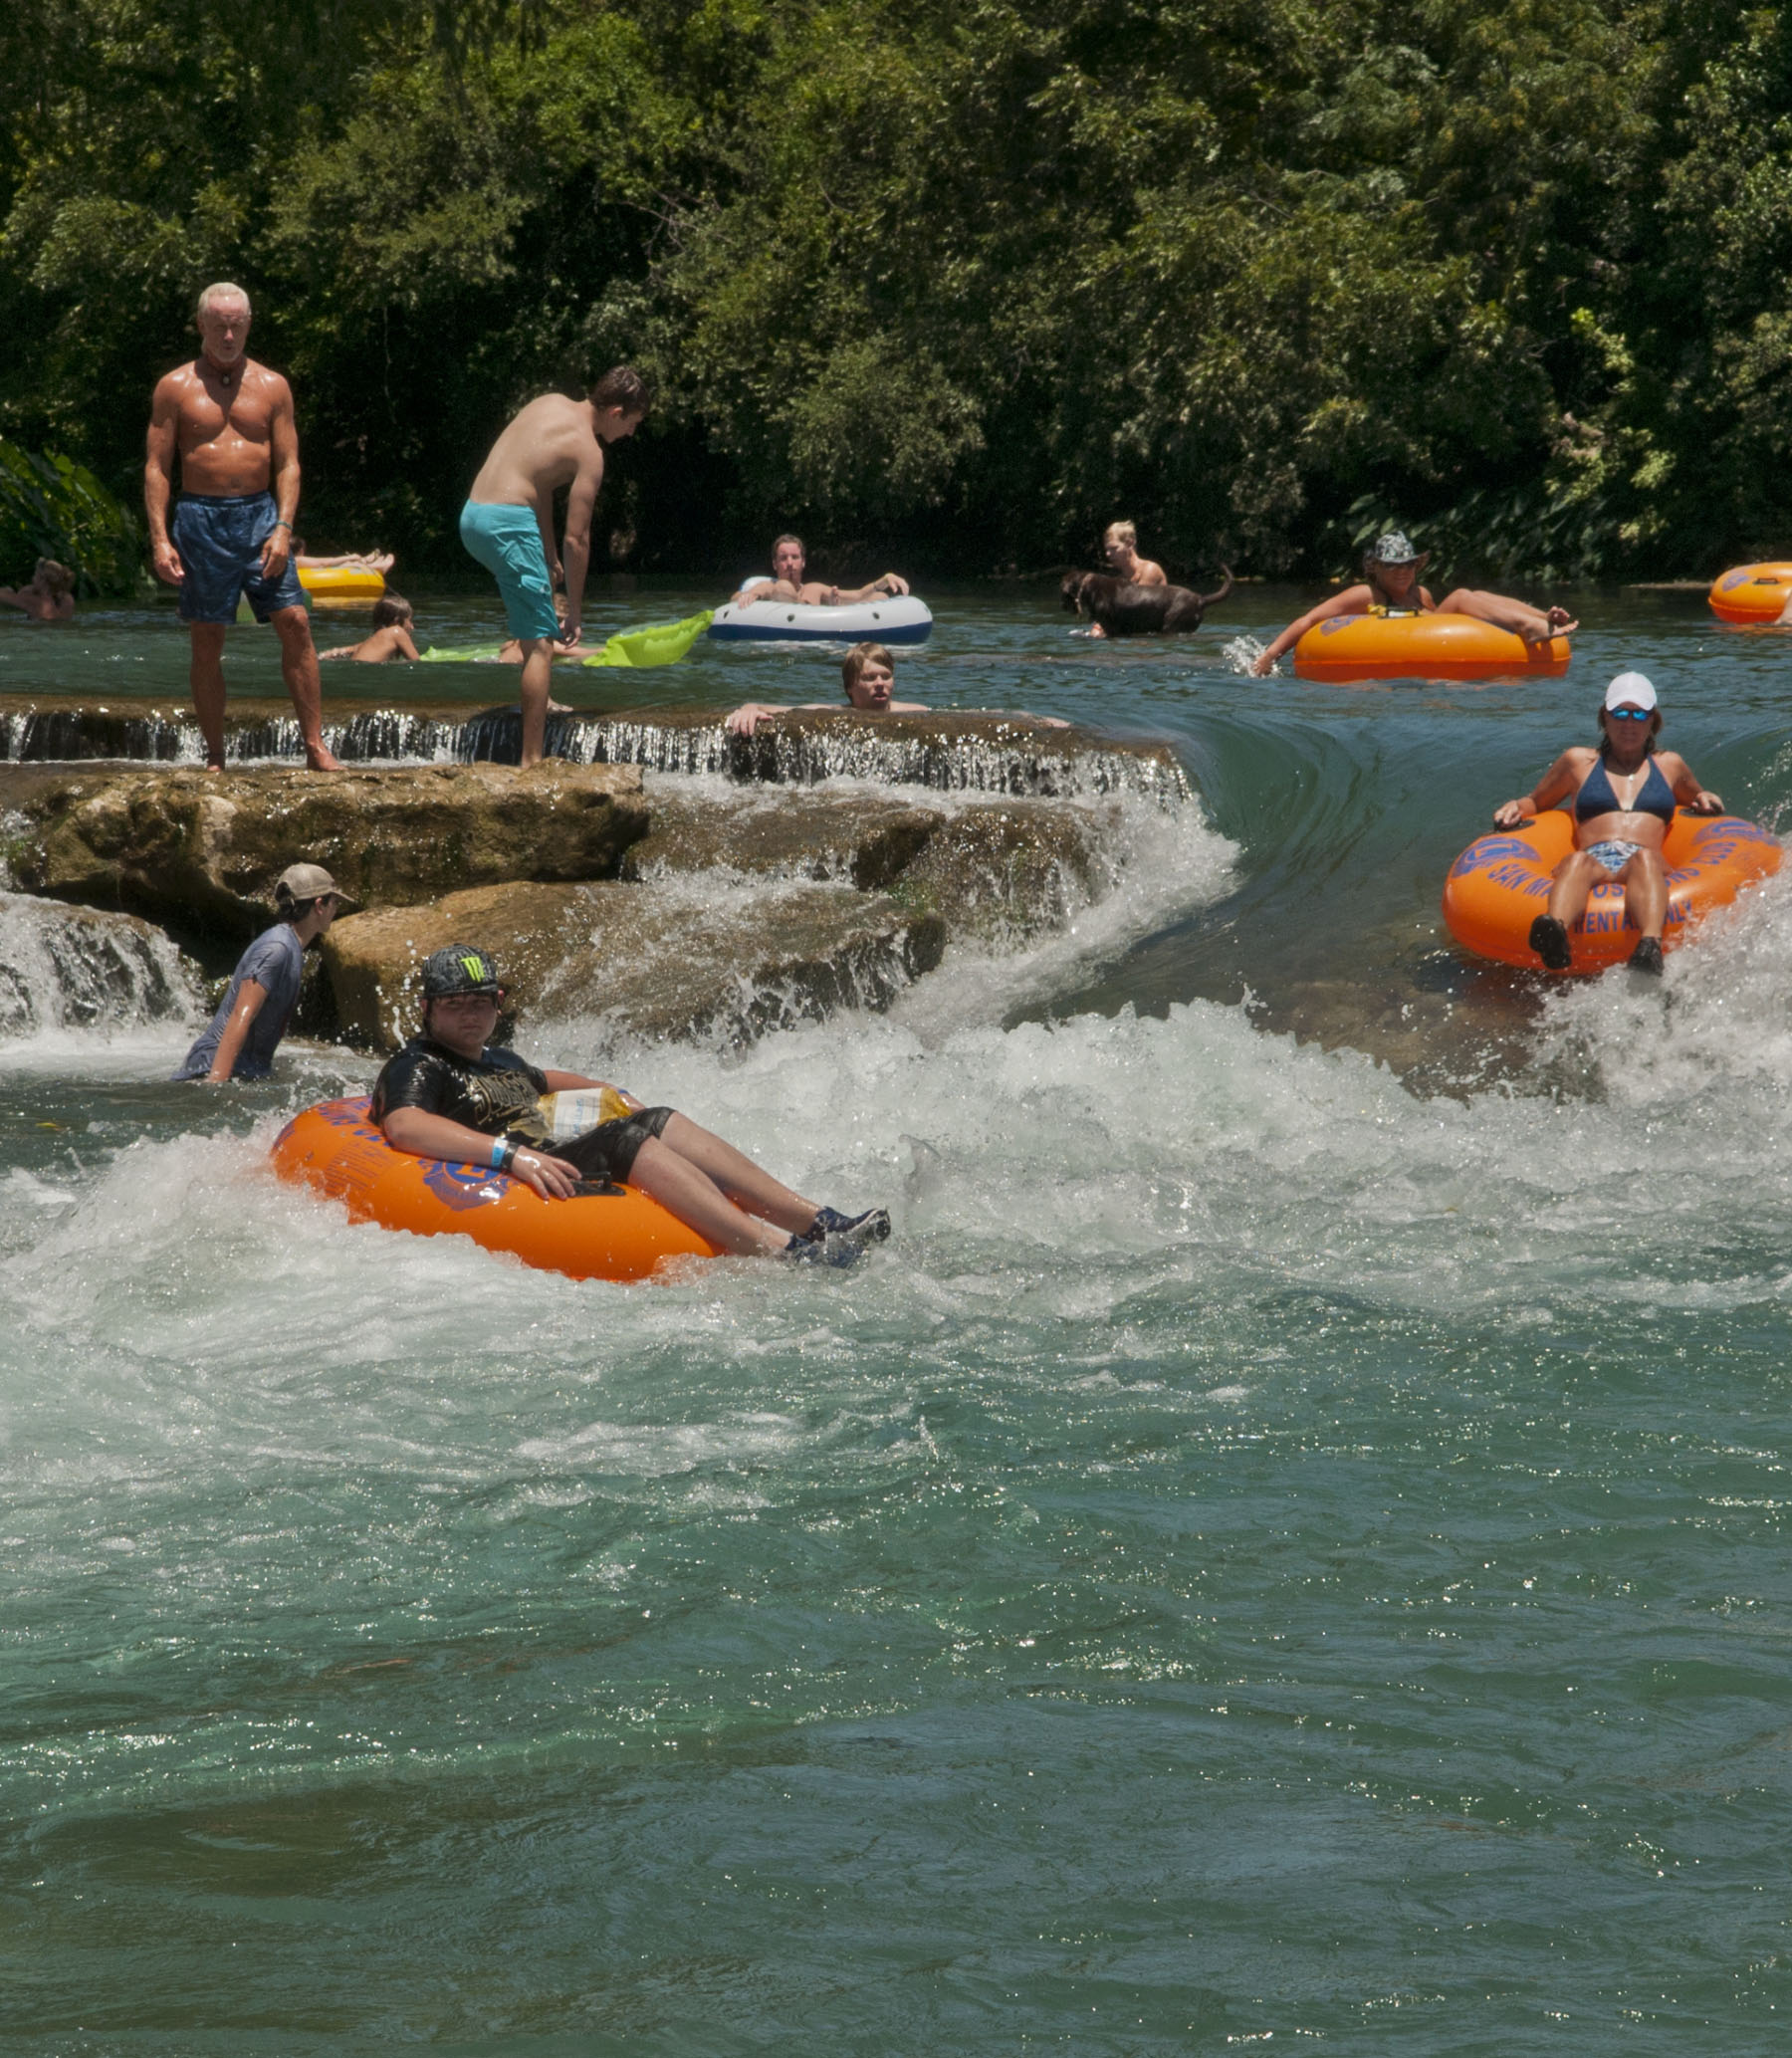 A group of people float down a small rapid in bright orange tubes in blue green water